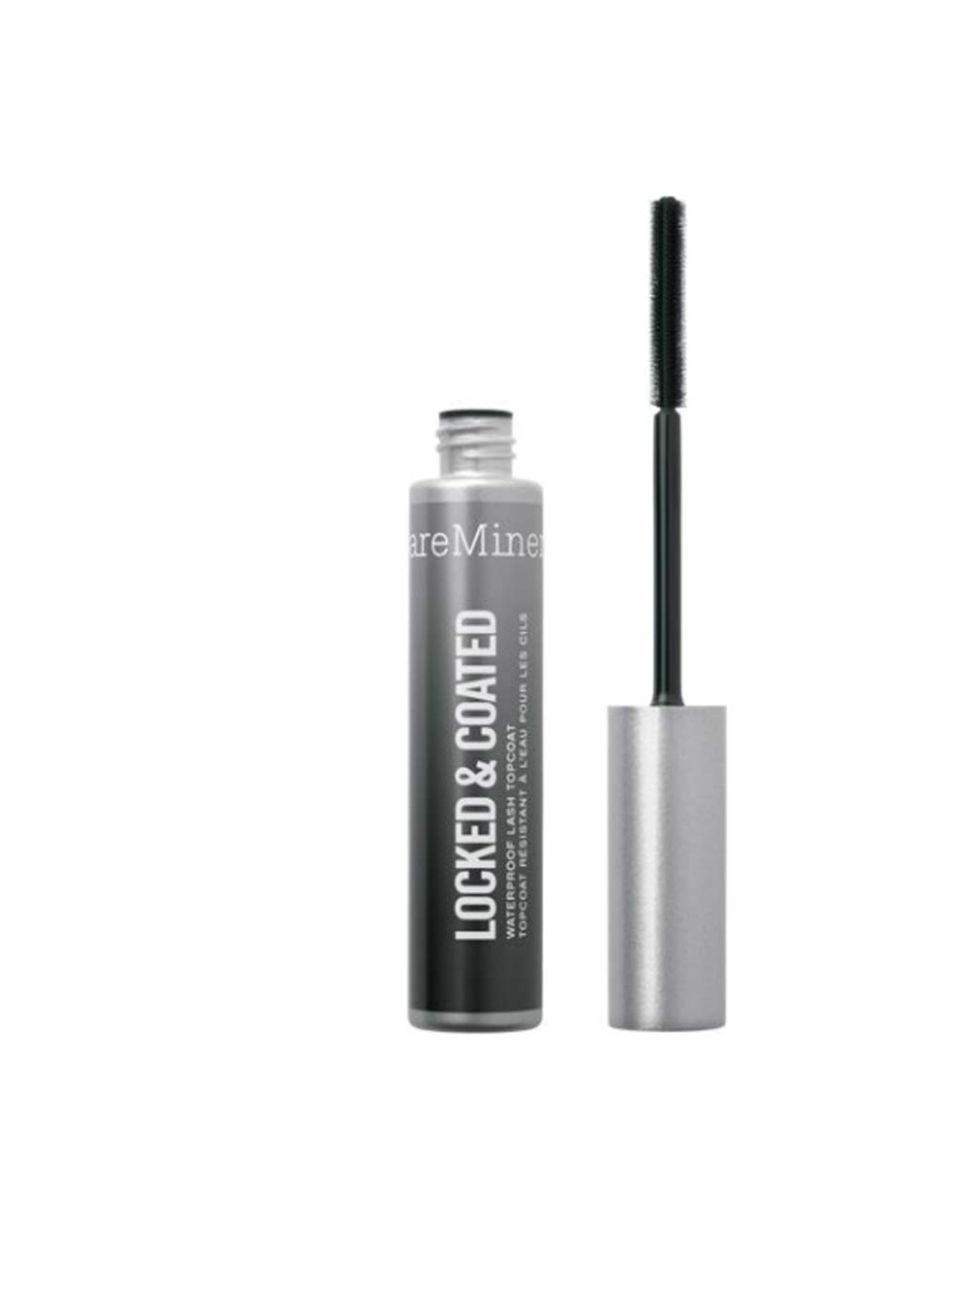 <p><a href="http://www.debenhams.com/webapp/wcs/stores/servlet/prod_10701_10001_123035016399_-1">Bare Minerals Locked & Coated Mascara, £12</a></p><p>This nifty wand turns any mascara into waterproof form and doubles up as a clear, lengthening mascara if 